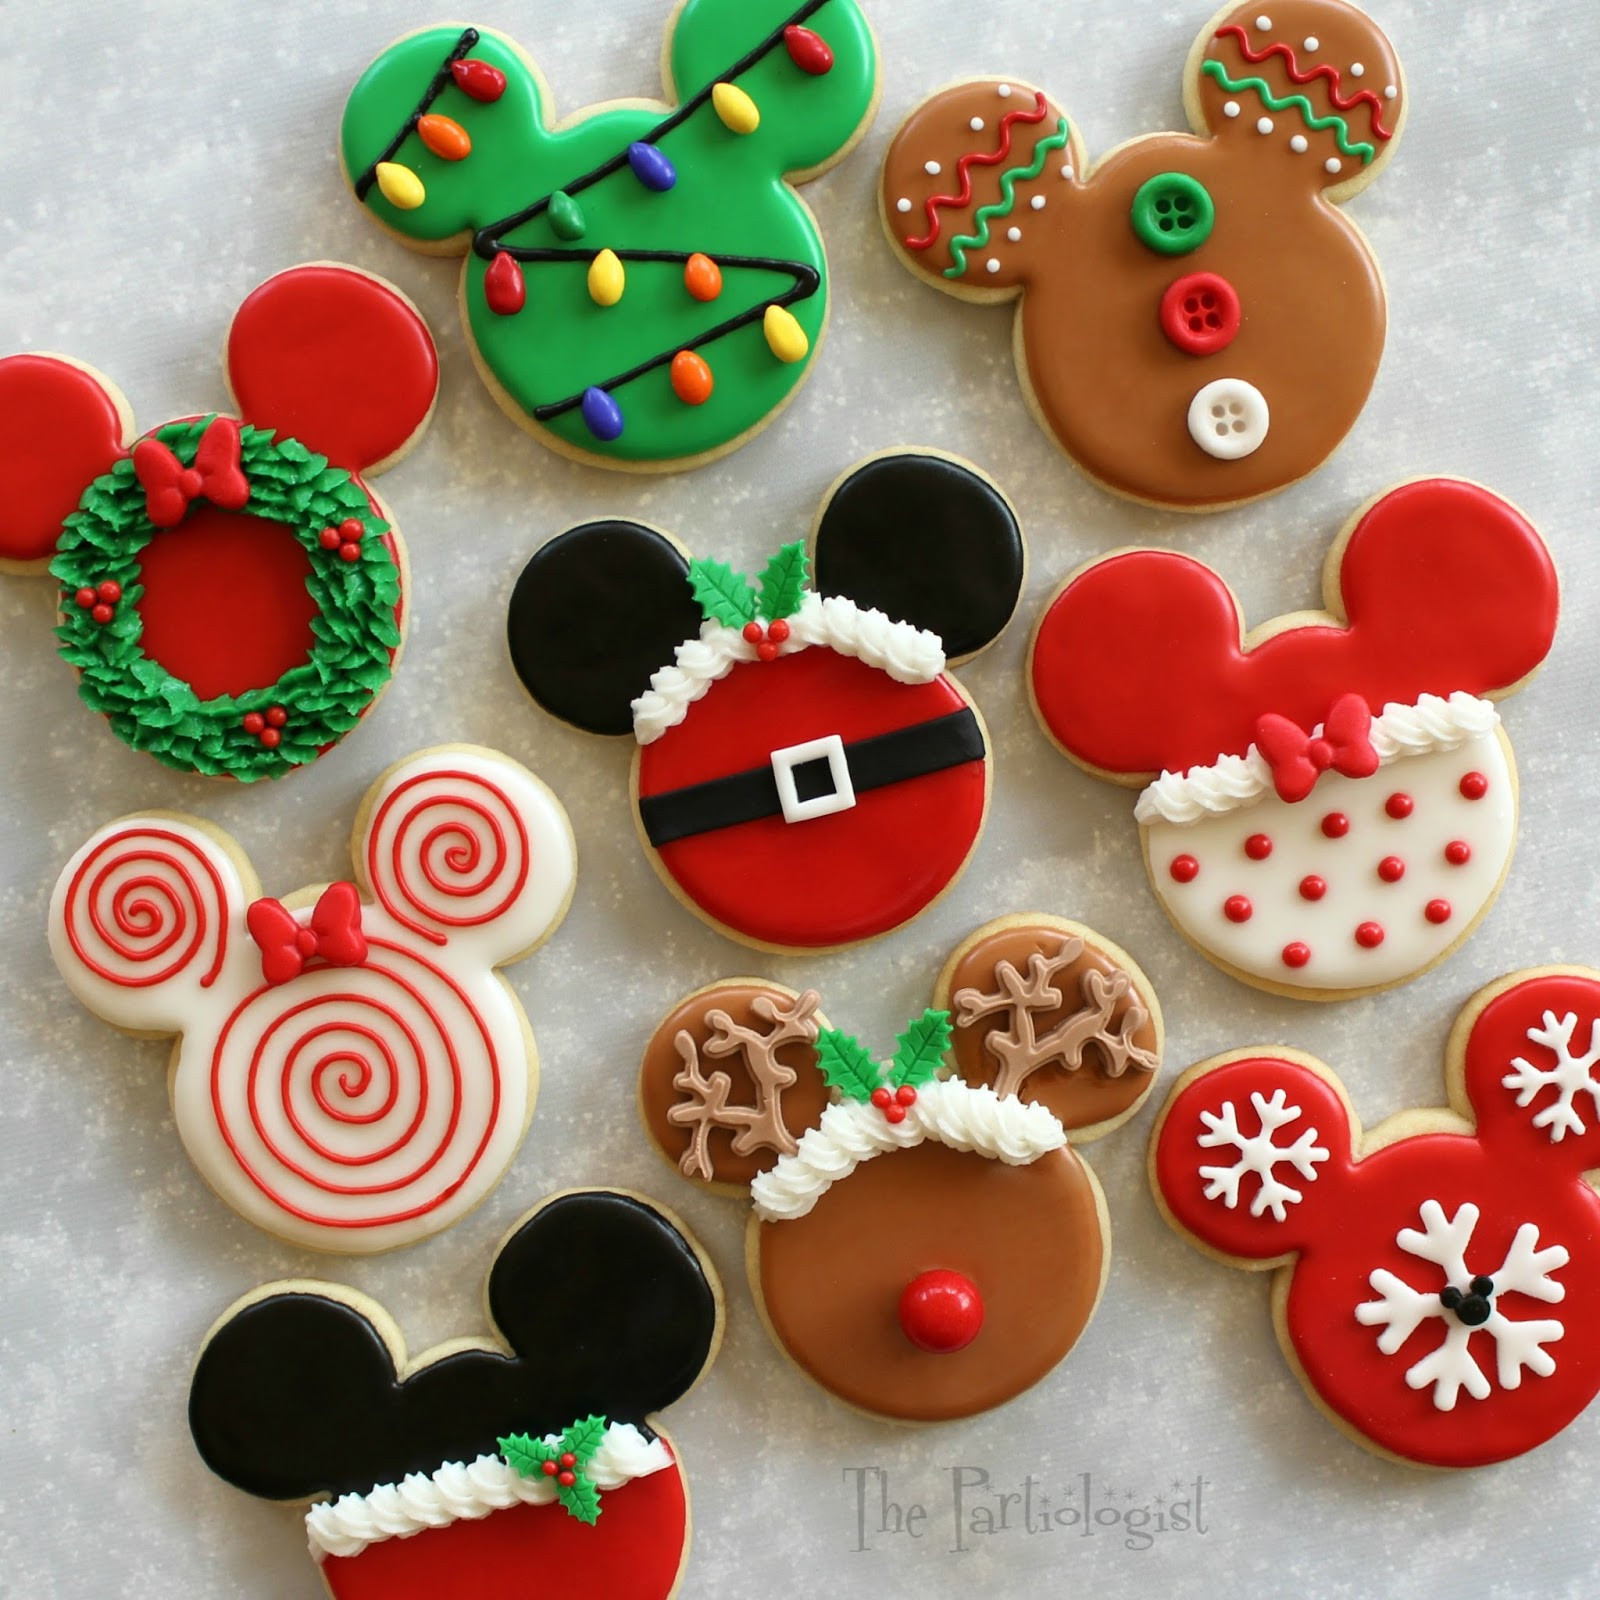 Holiday Christmas Cookies
 The Partiologist Disney Themed Christmas Cookies